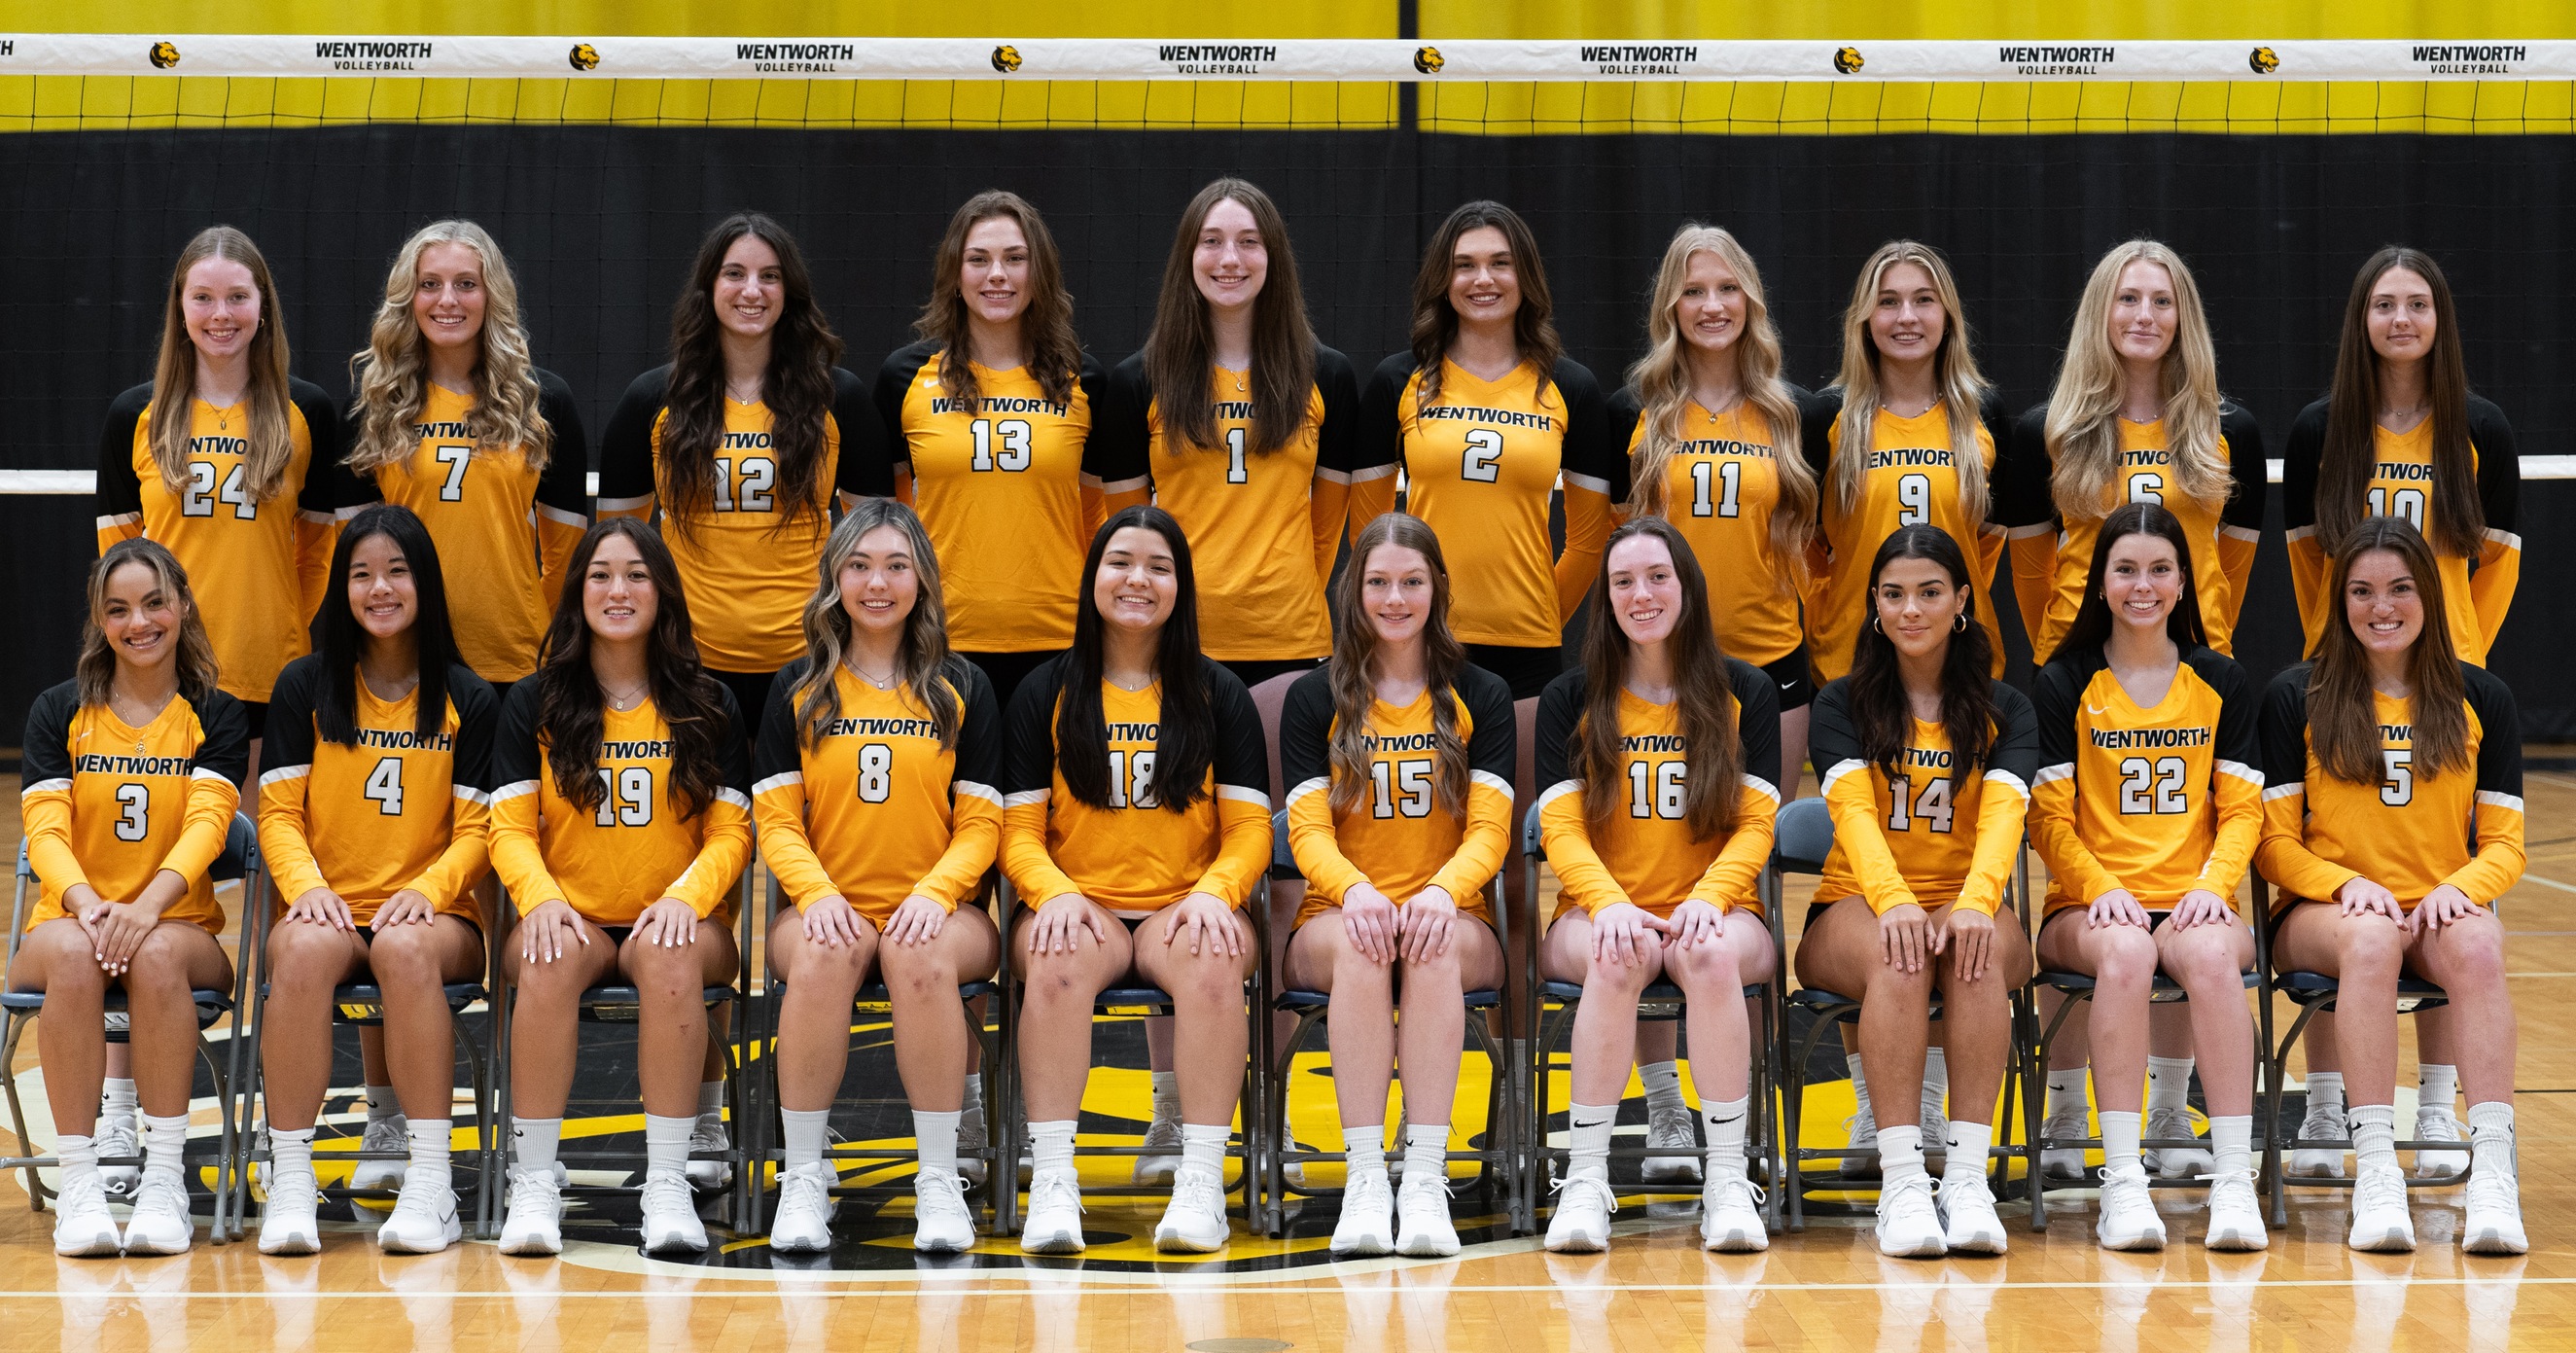 Tremendous Run for Women's Volleyball Ends Against Springfield